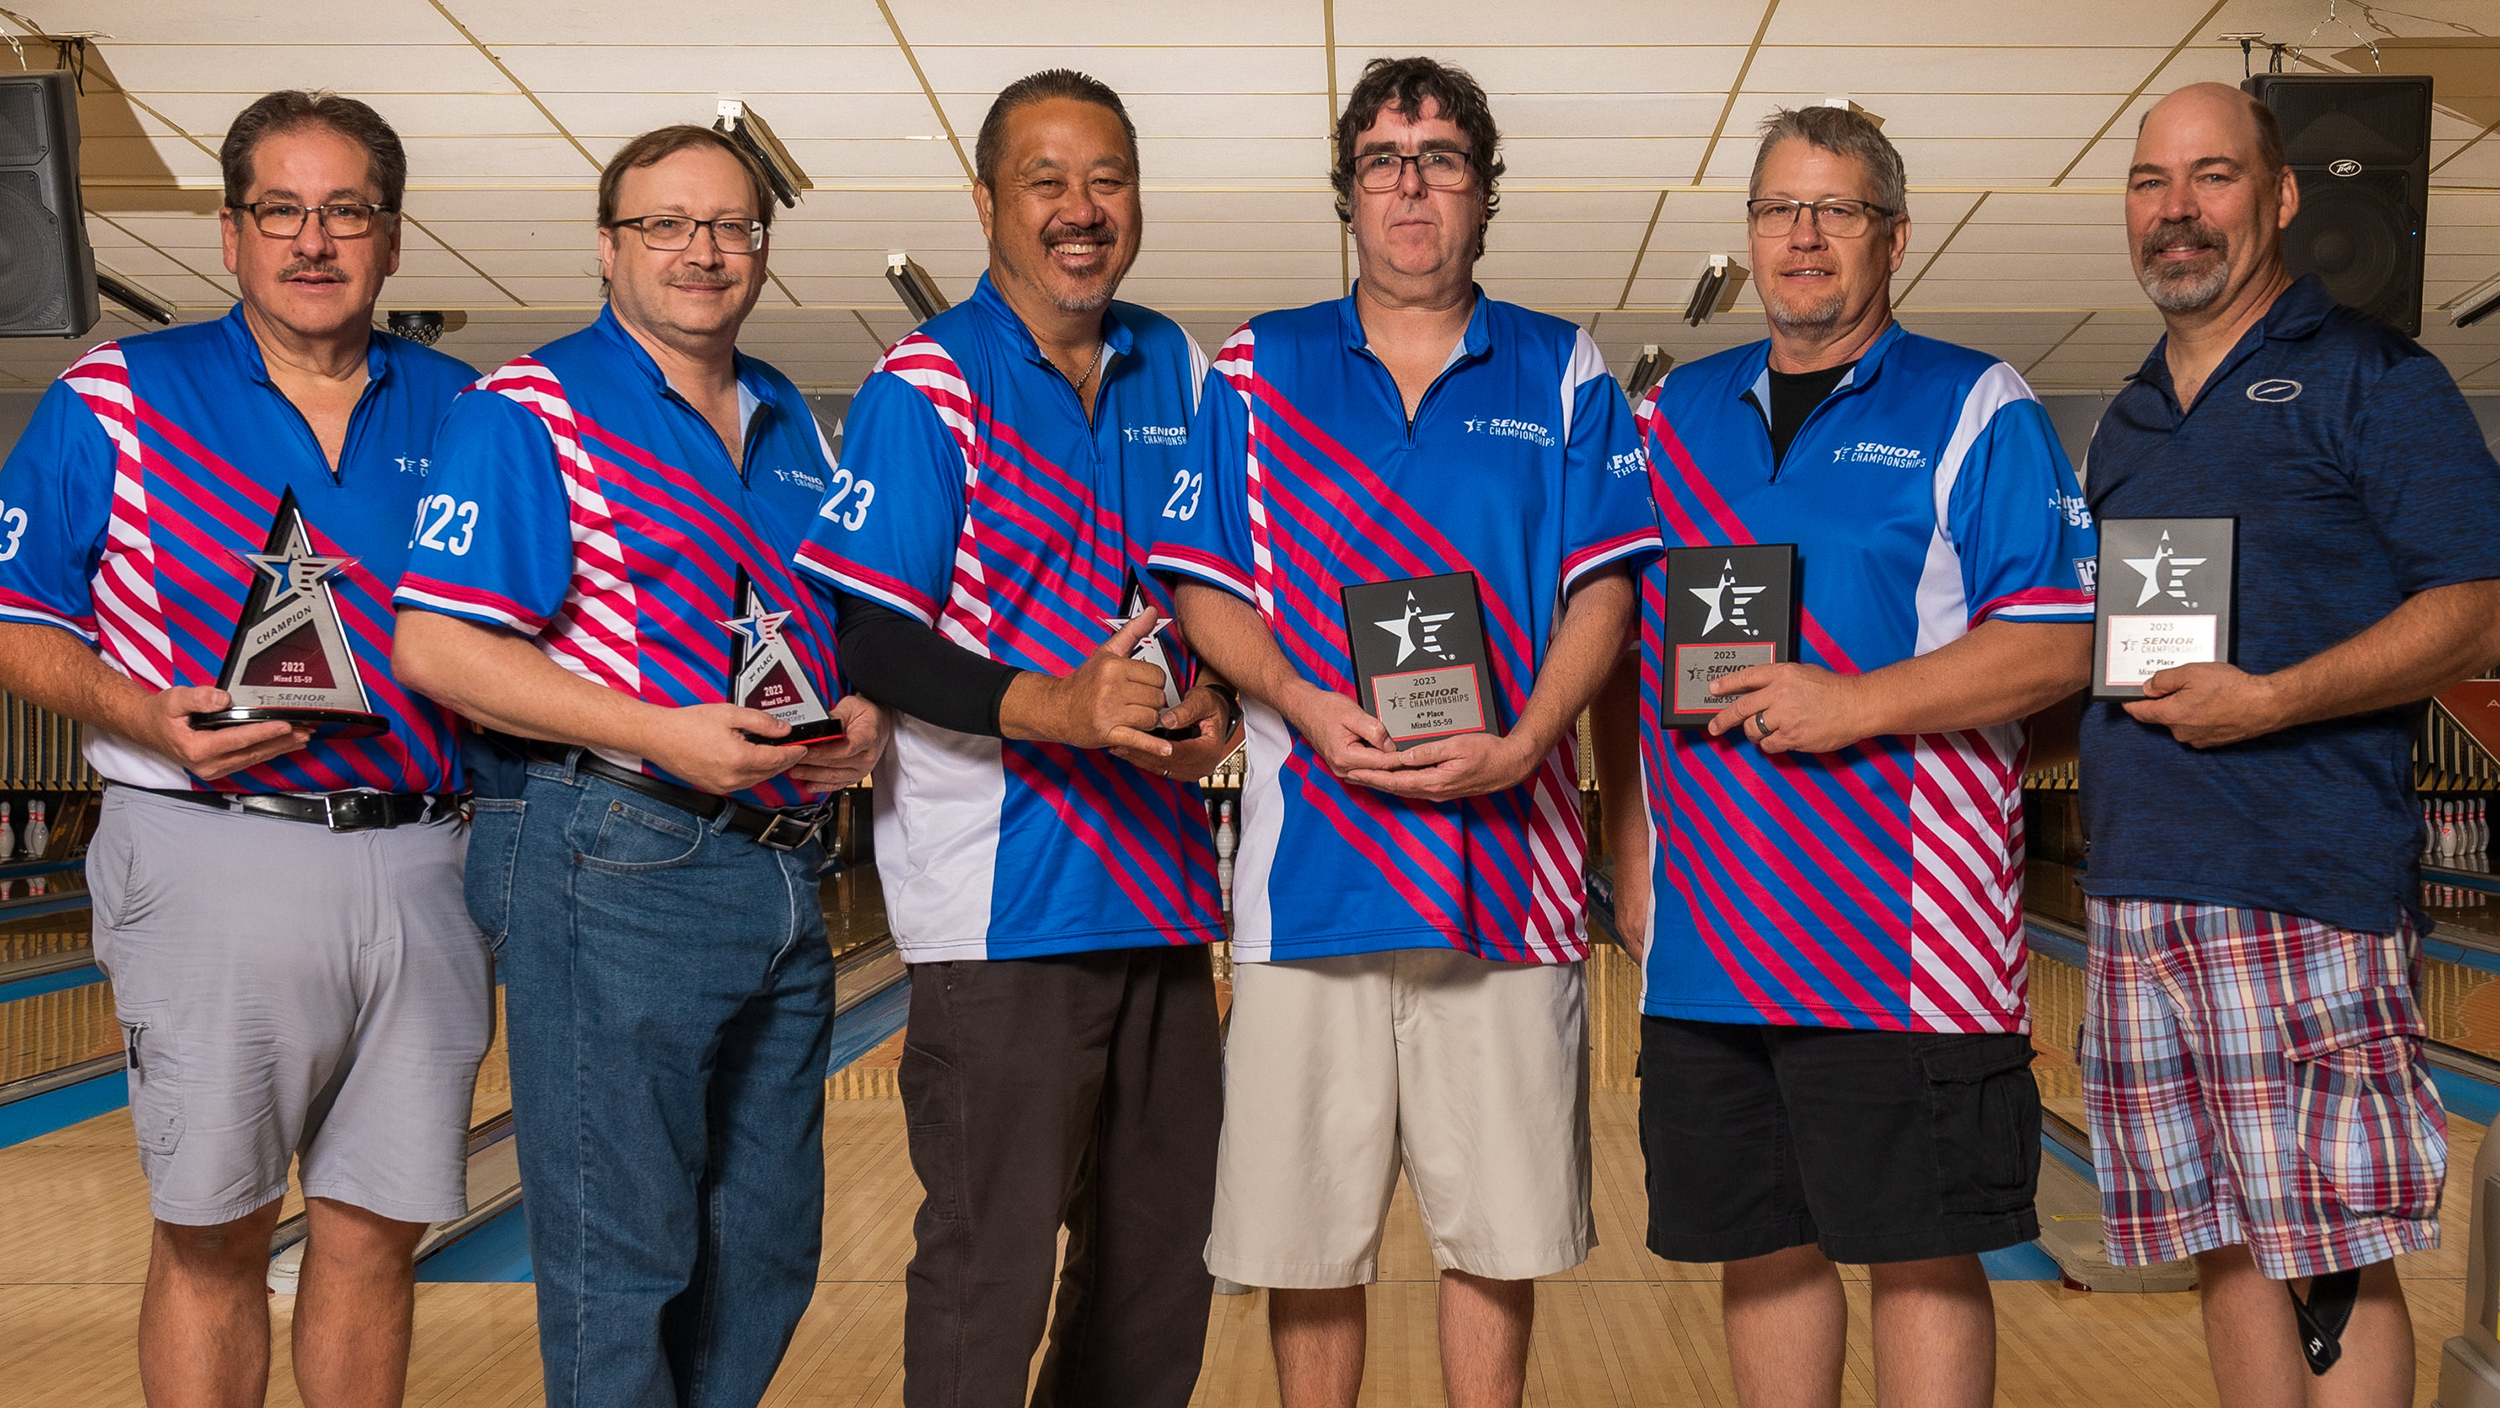 The top six finishers in Mixed 55-59 at the 2023 USBC Senior Championships.